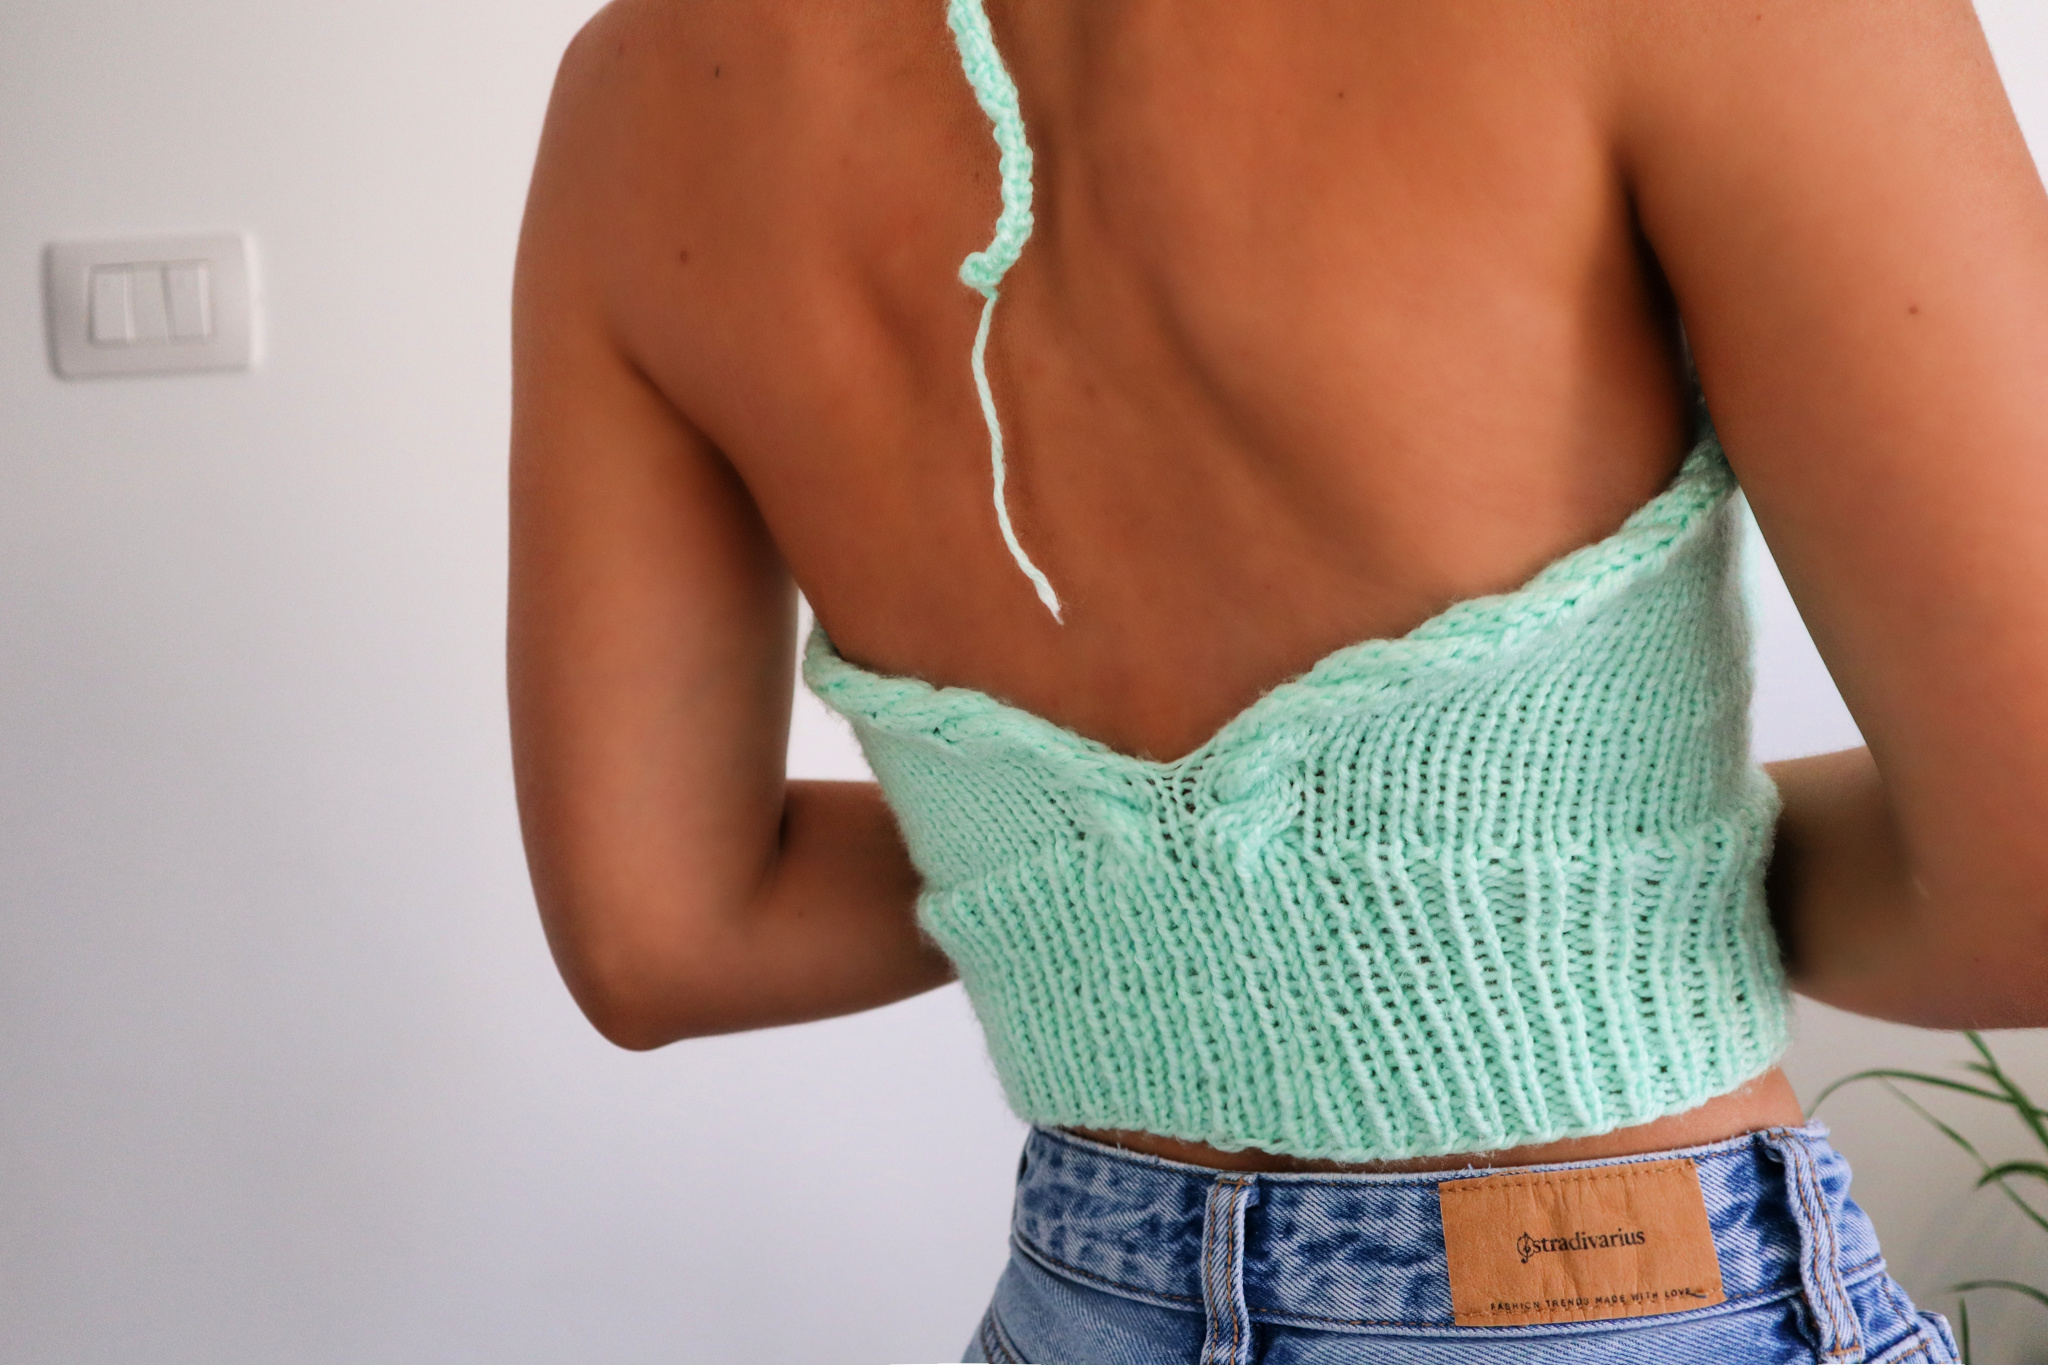 Minty Fresh – Cable Knit Halter Top Pattern – The Snugglery